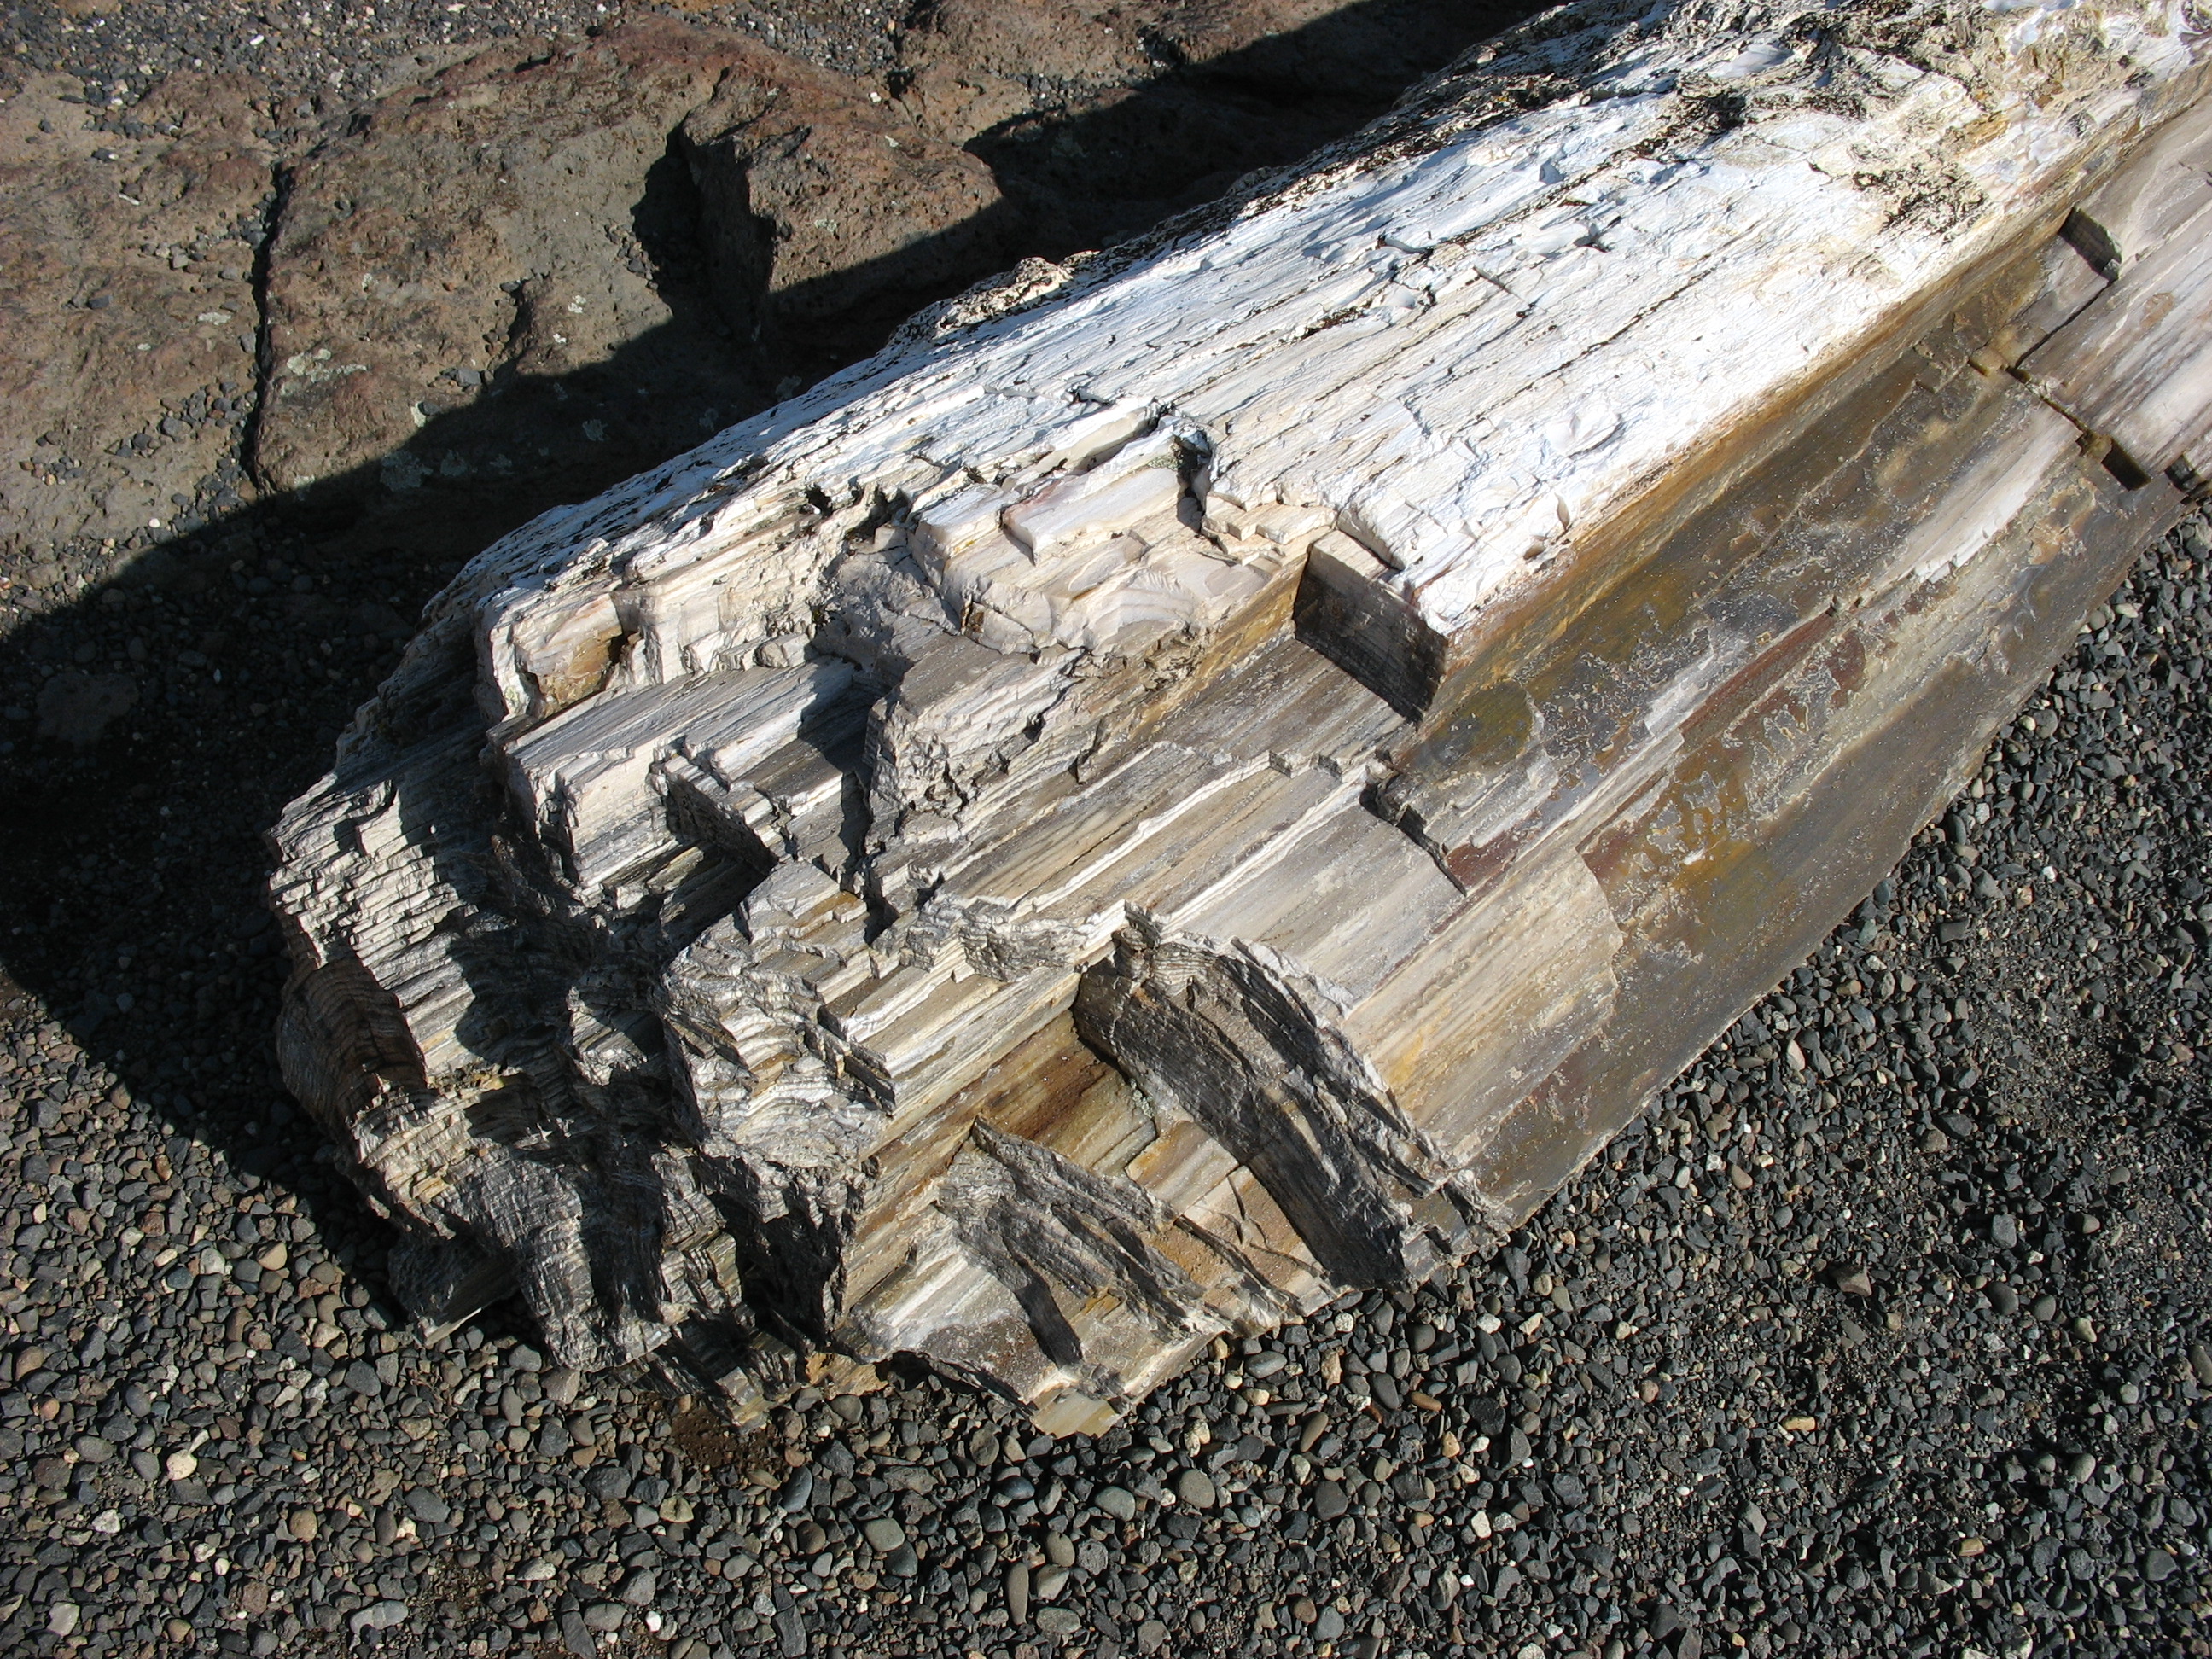 Photo of Ginkgo Petrified Forest State Park